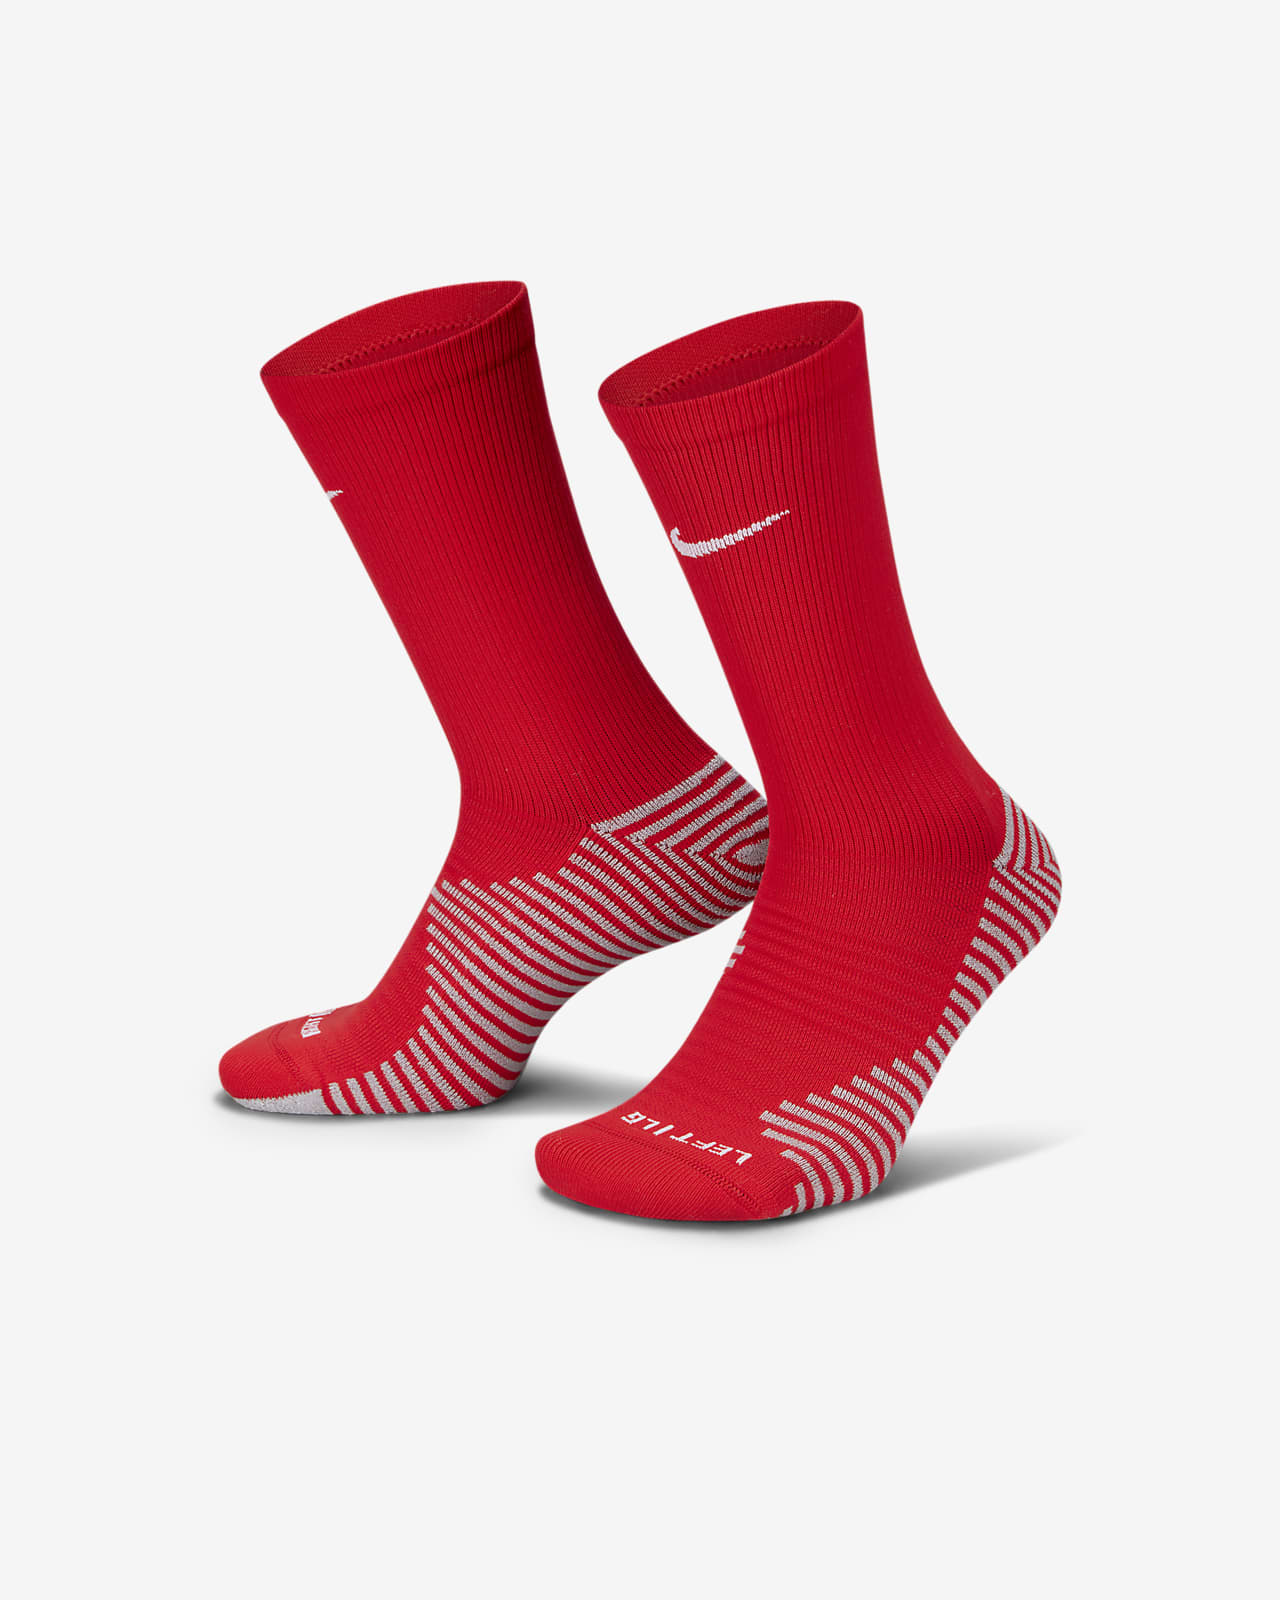 Nike Grip Socks: why should I be wearing them? - Football Nation